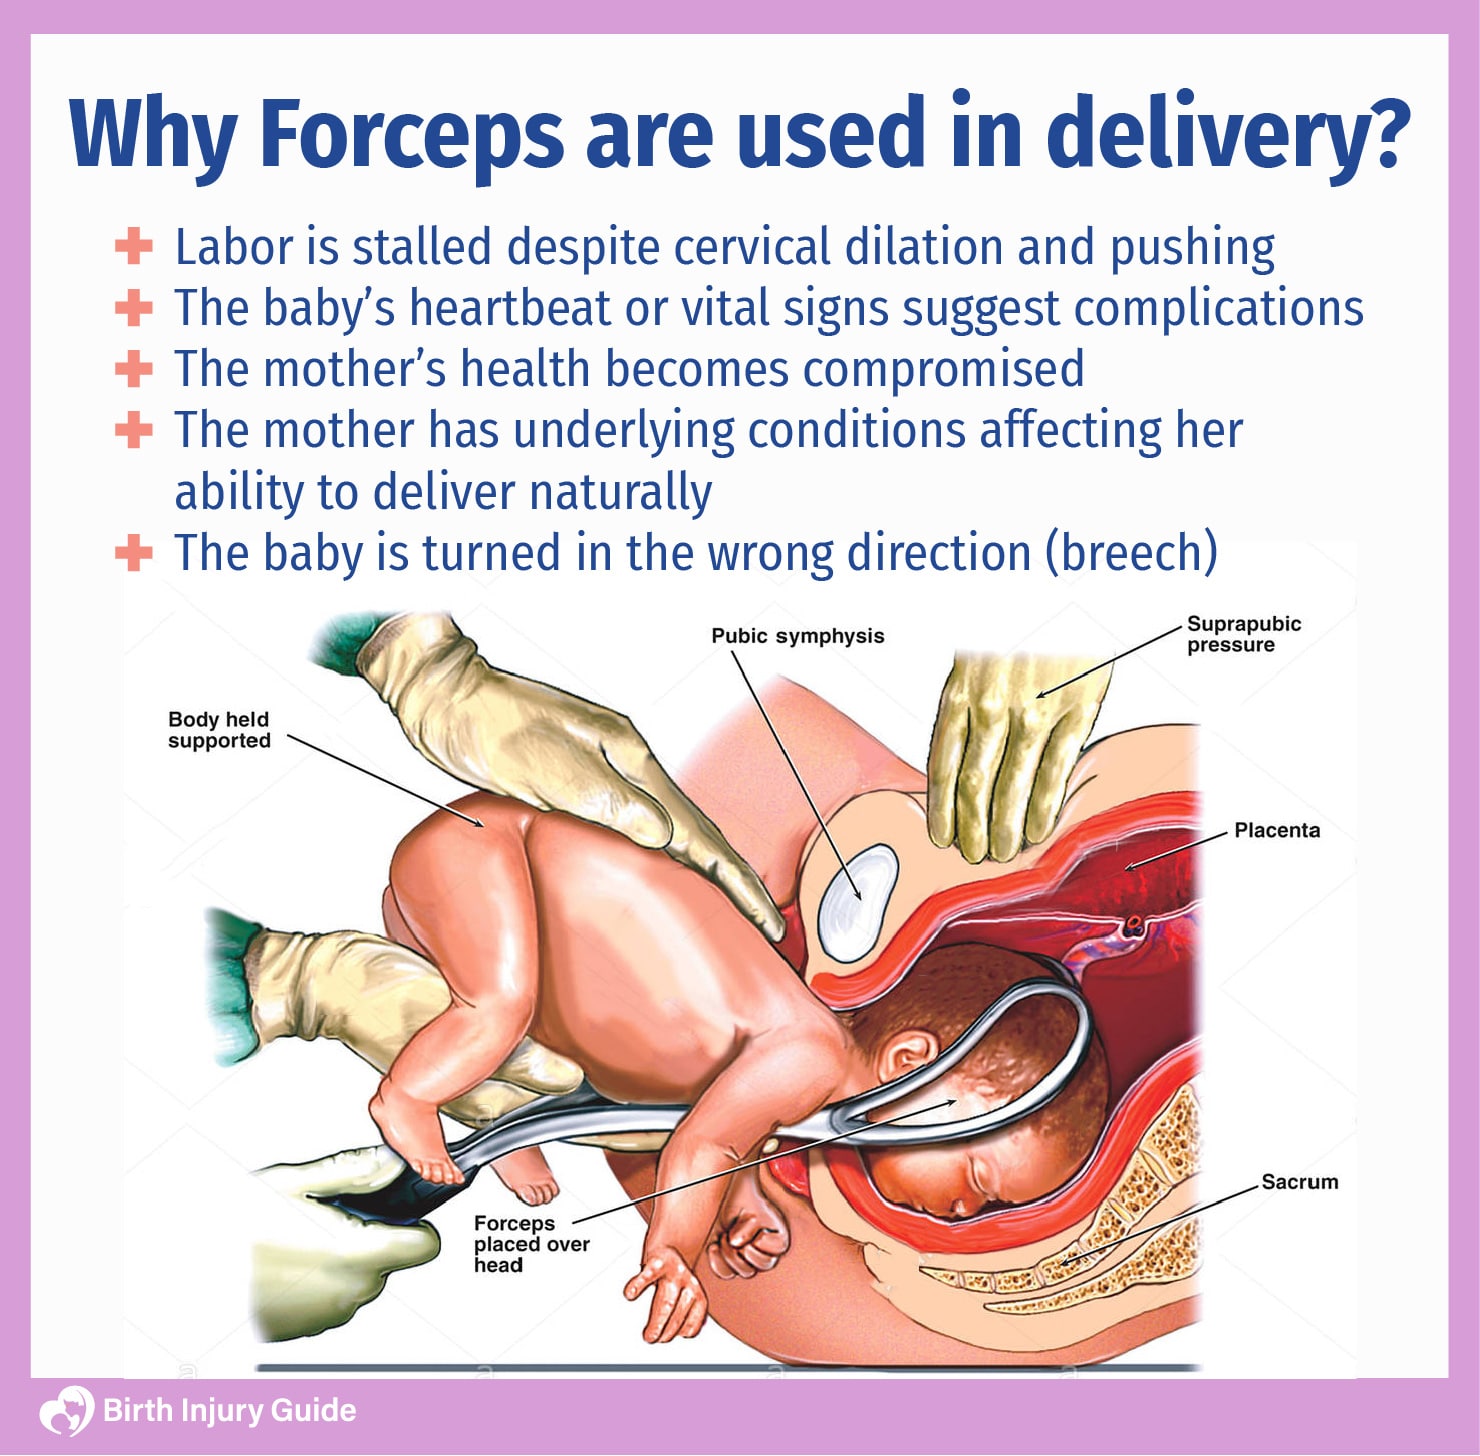 why are forceps used in delivery?